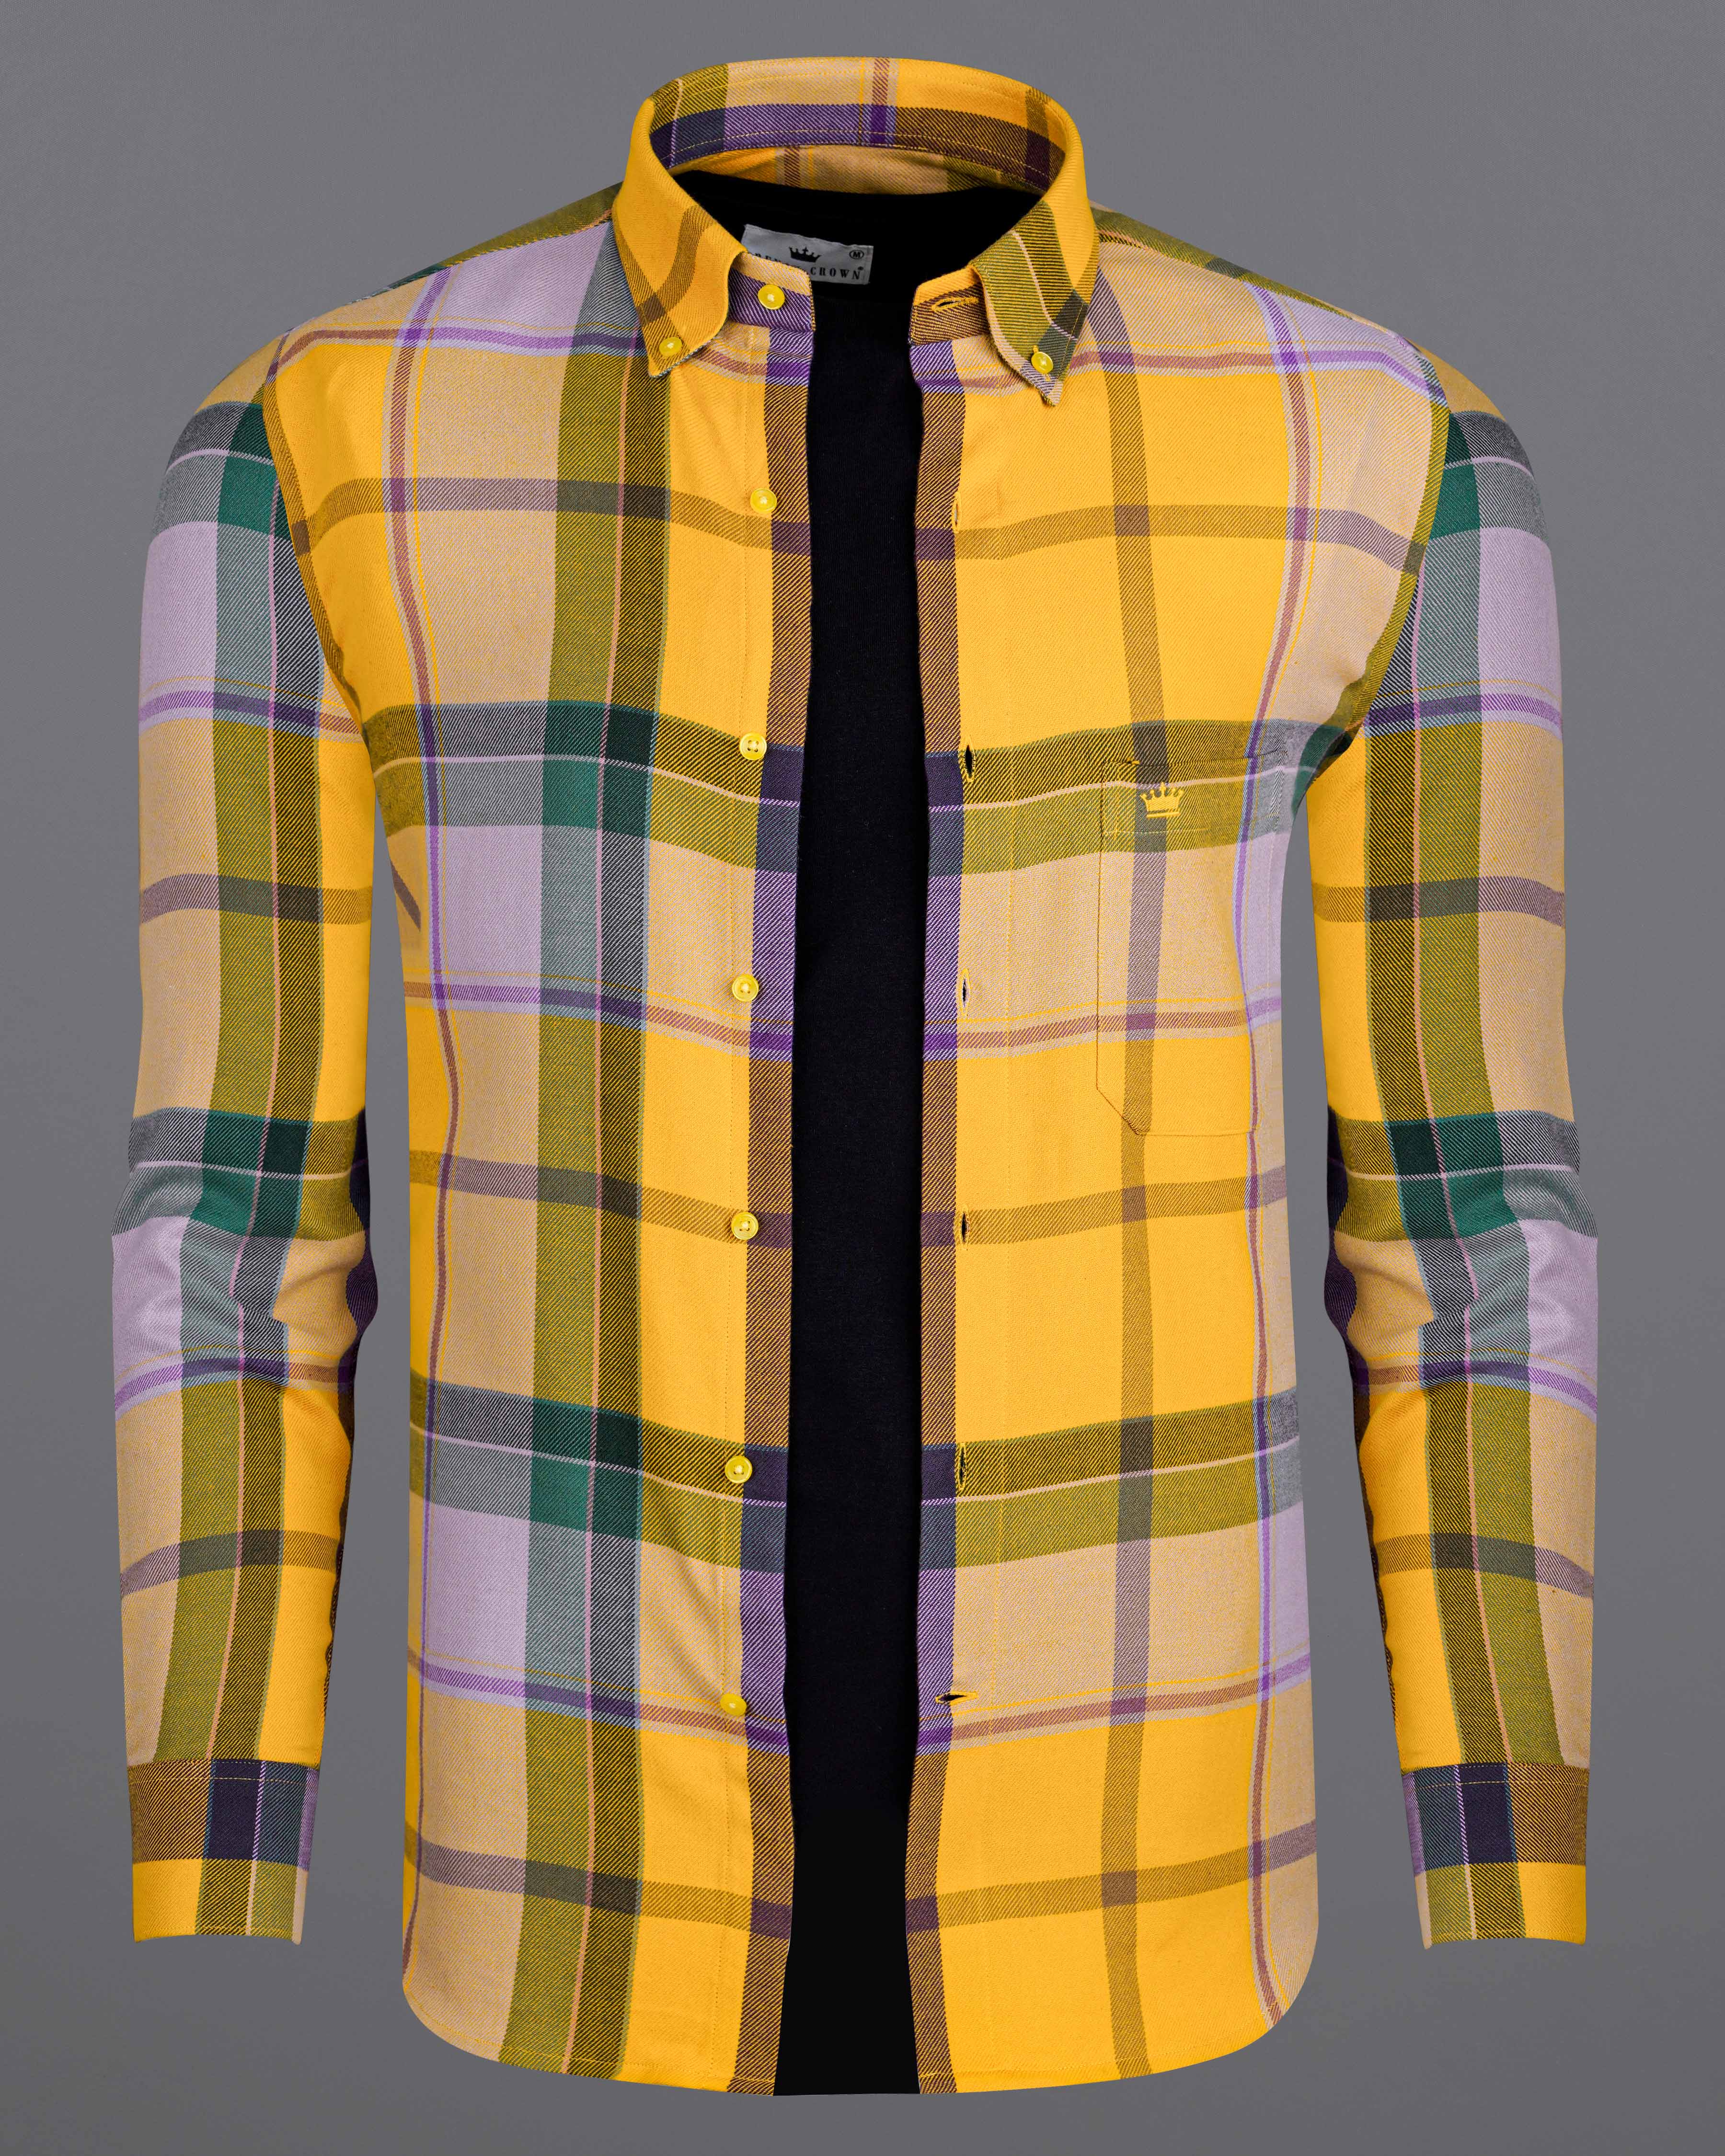 Squash Yellow with Fuchsia Purple and Spruce Green Plaid Flannel Overshirt  8441-BD-YL-38, 8441-BD-YL-H-38,8441-BD-YL-39,8441-BD-YL-H-39,8441-BD-YL-40,8441-BD-YL-H-40,8441-BD-YL-42,8441-BD-YL-H-42,8441-BD-YL-44,8441-BD-YL-H-44,8441-BD-YL-46,8441-BD-YL-H-46,8441-BD-YL-48,8441-BD-YL-H-48,8441-BD-YL-50,8441-BD-YL-H-50,8441-BD-YL-52,8441-BD-YL-H-52